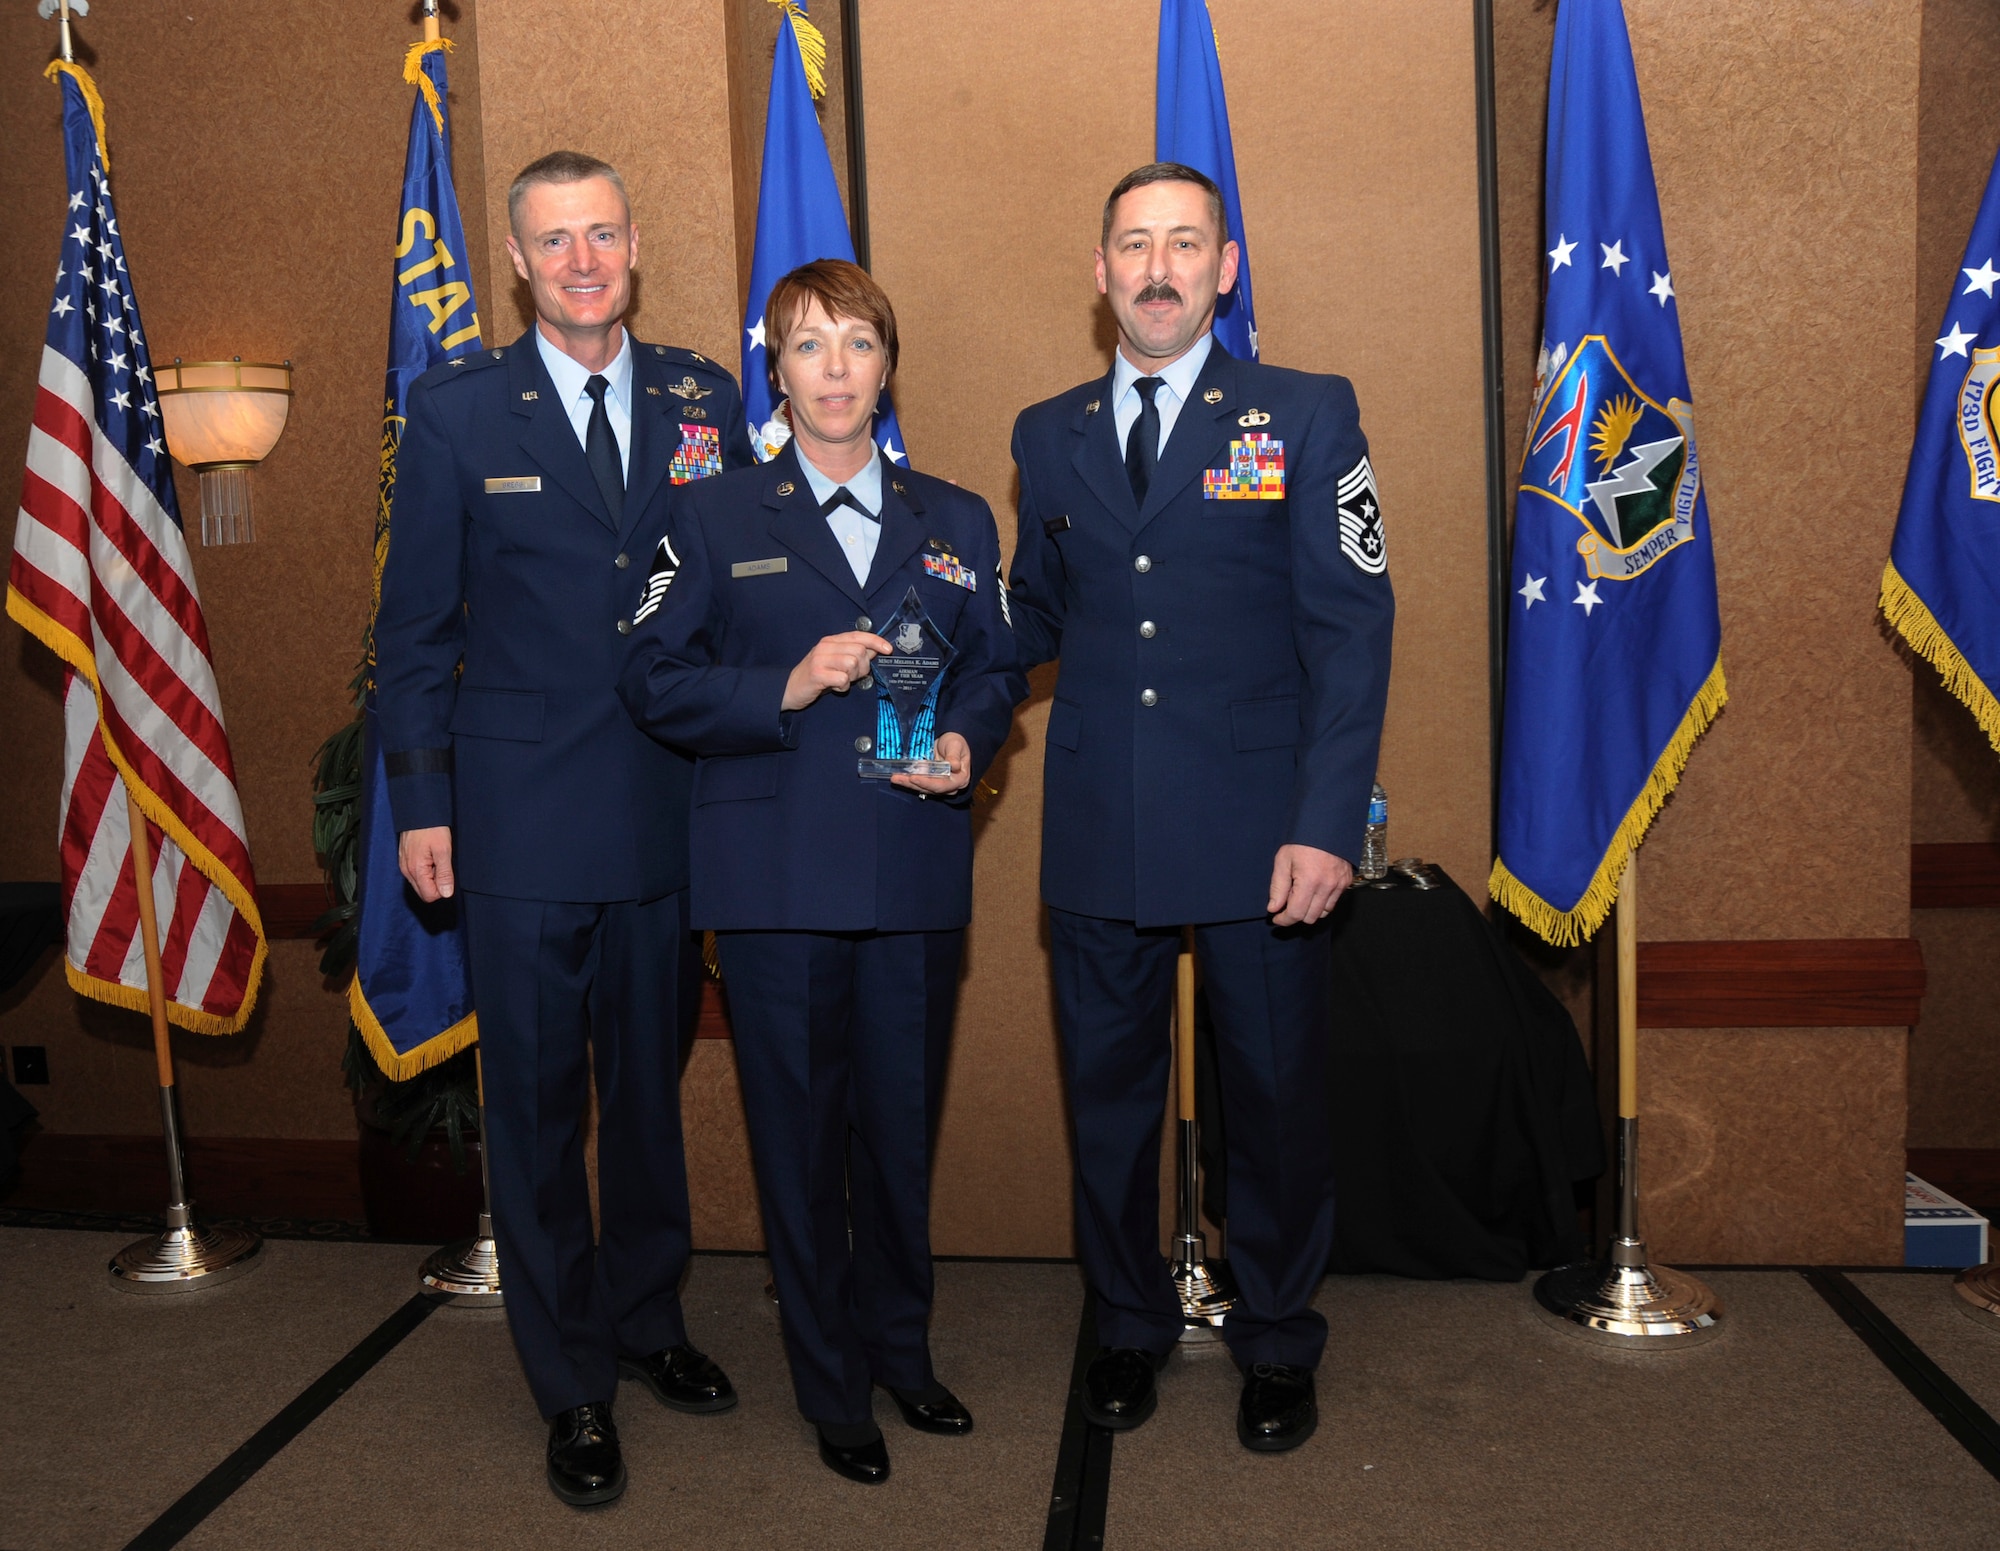 Oregon Air National Guard Commander Brig. General Steven Gregg (left) and Oregon State Air National Guard Command Chief Master Sgt. Mark Russell (far right) stand with Master Sgt. Melissa Adams who was selected overall Category III Airman of the Year of the 142nd Fighter Wing, Oregon Air National Guard, during the 18th Annual Oregon Air National Guard Awards Banquet, held on February 25, 2012 in Portland, Ore. (US Air Force Photograph by Tech. Sgt. John Hughel, 142nd Fighter Wing Public Affairs)(Released)